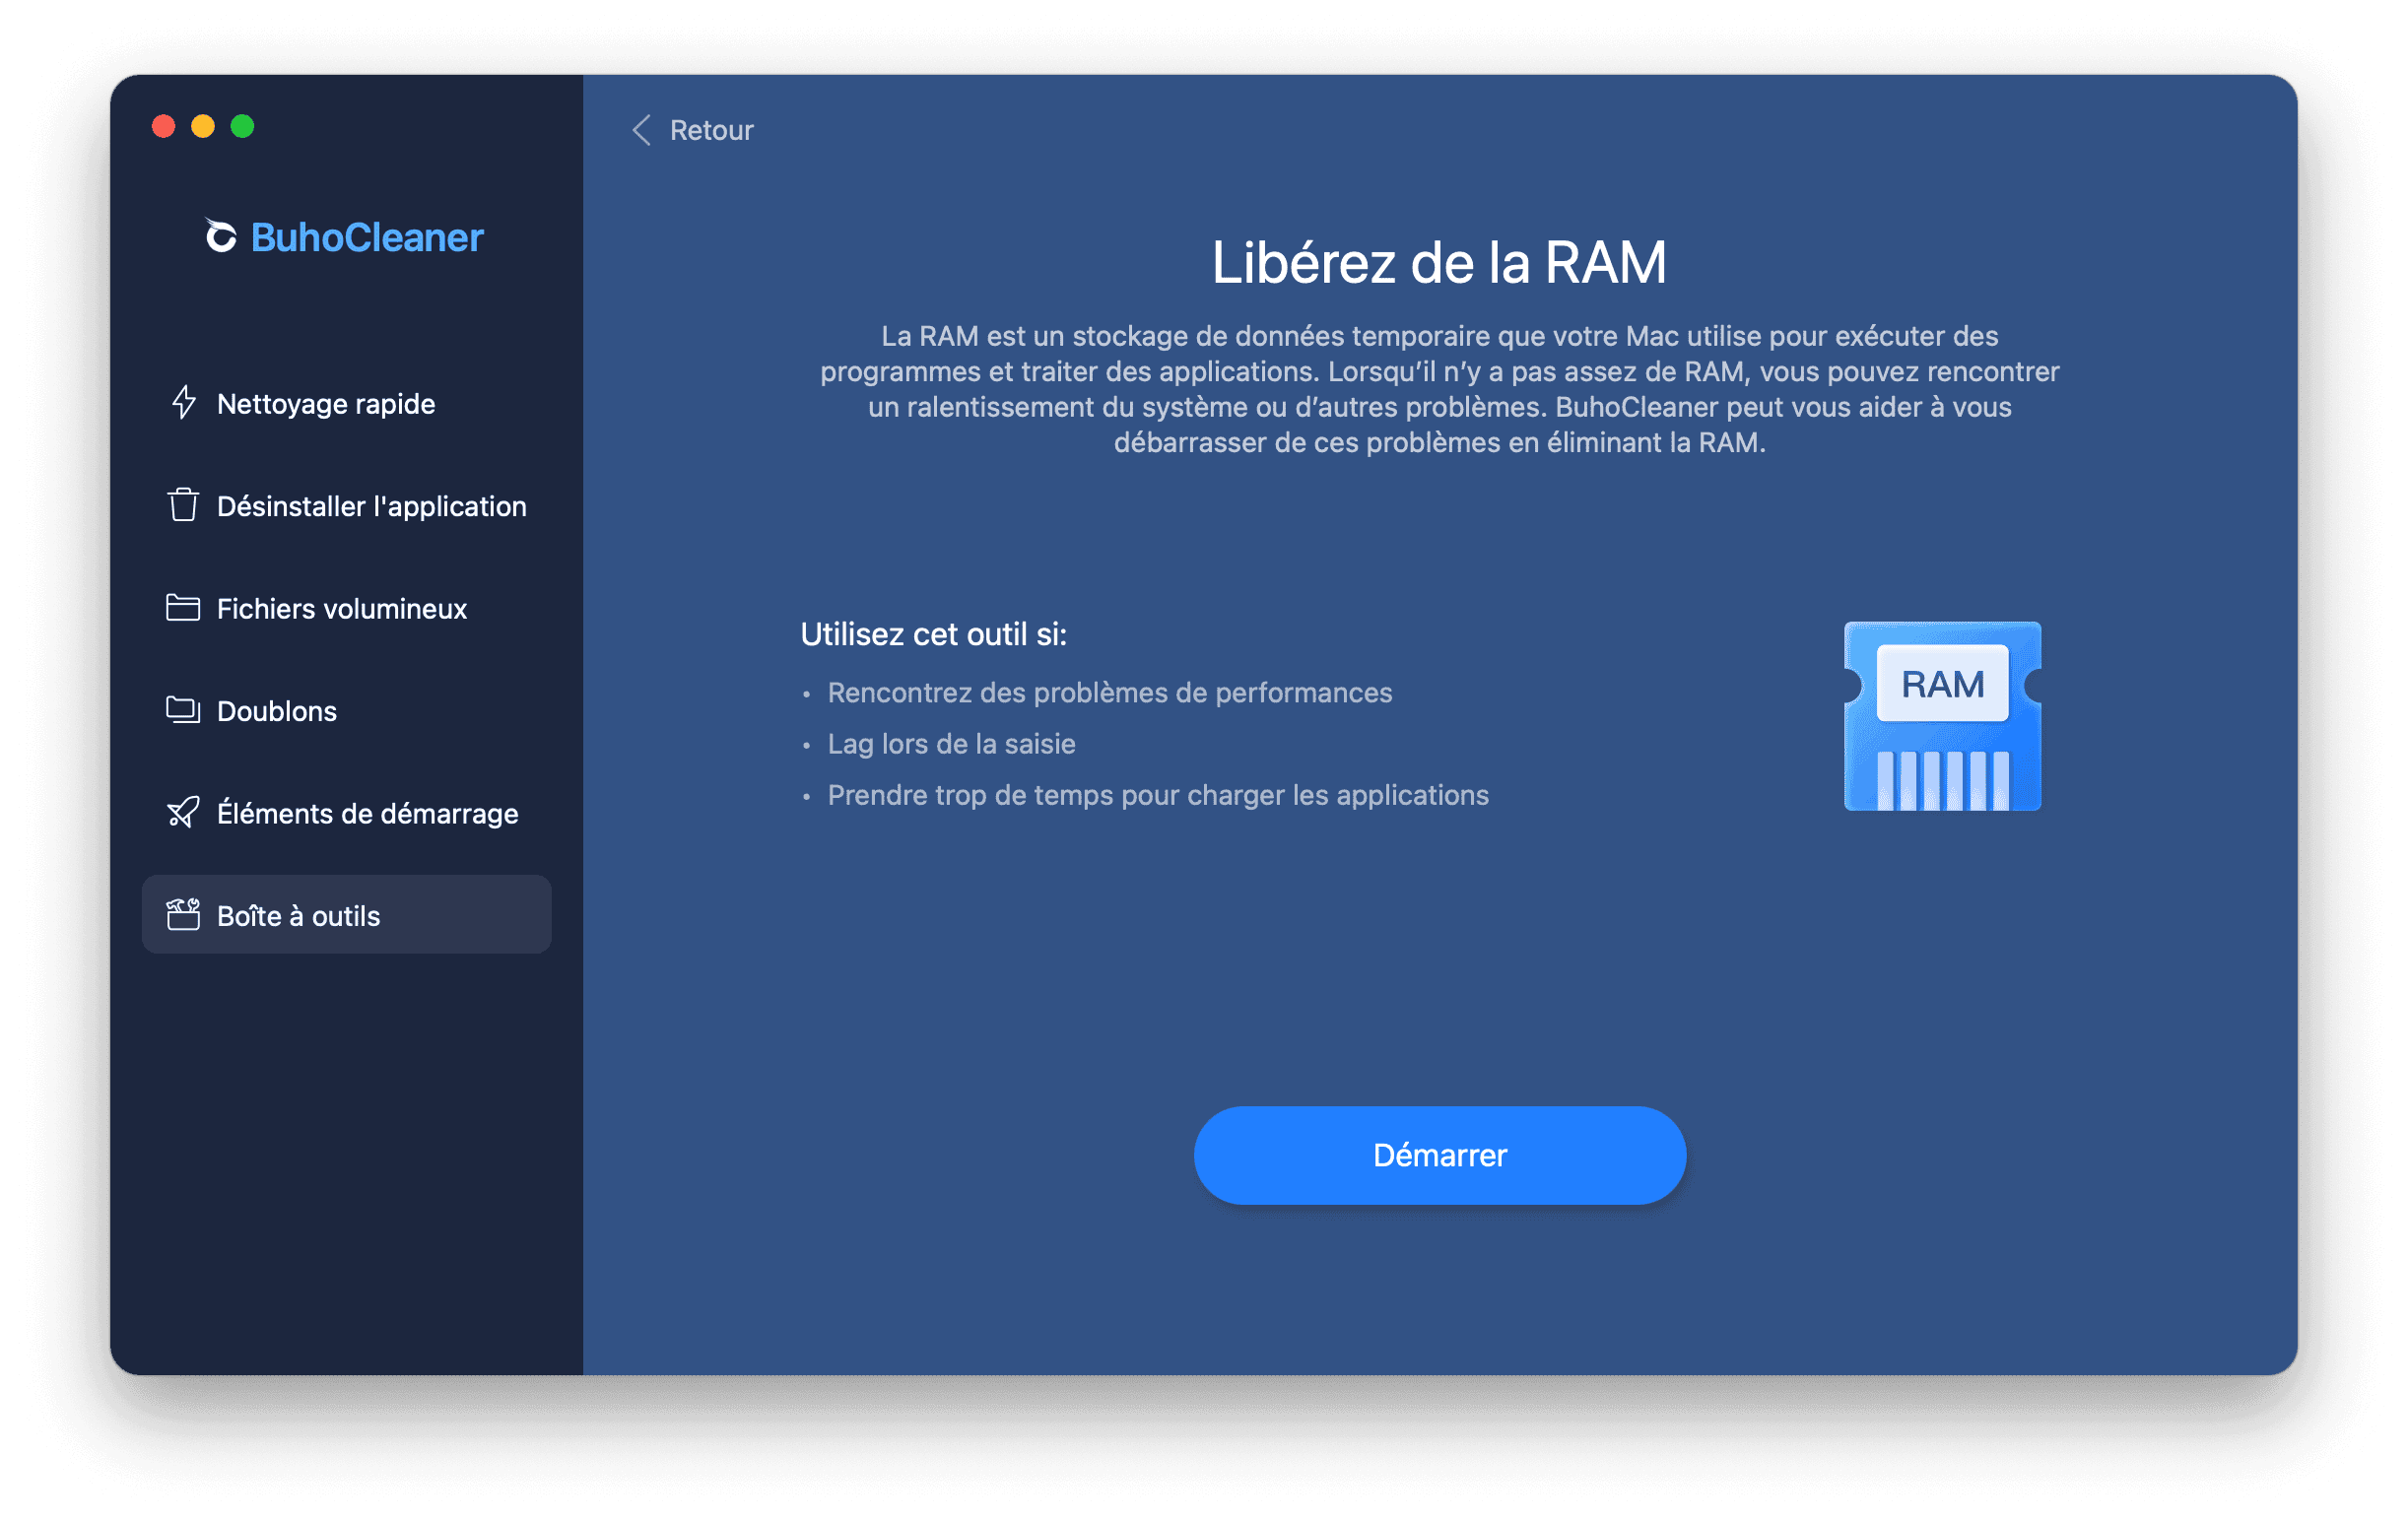 Free Up RAM with BuhoCleaner